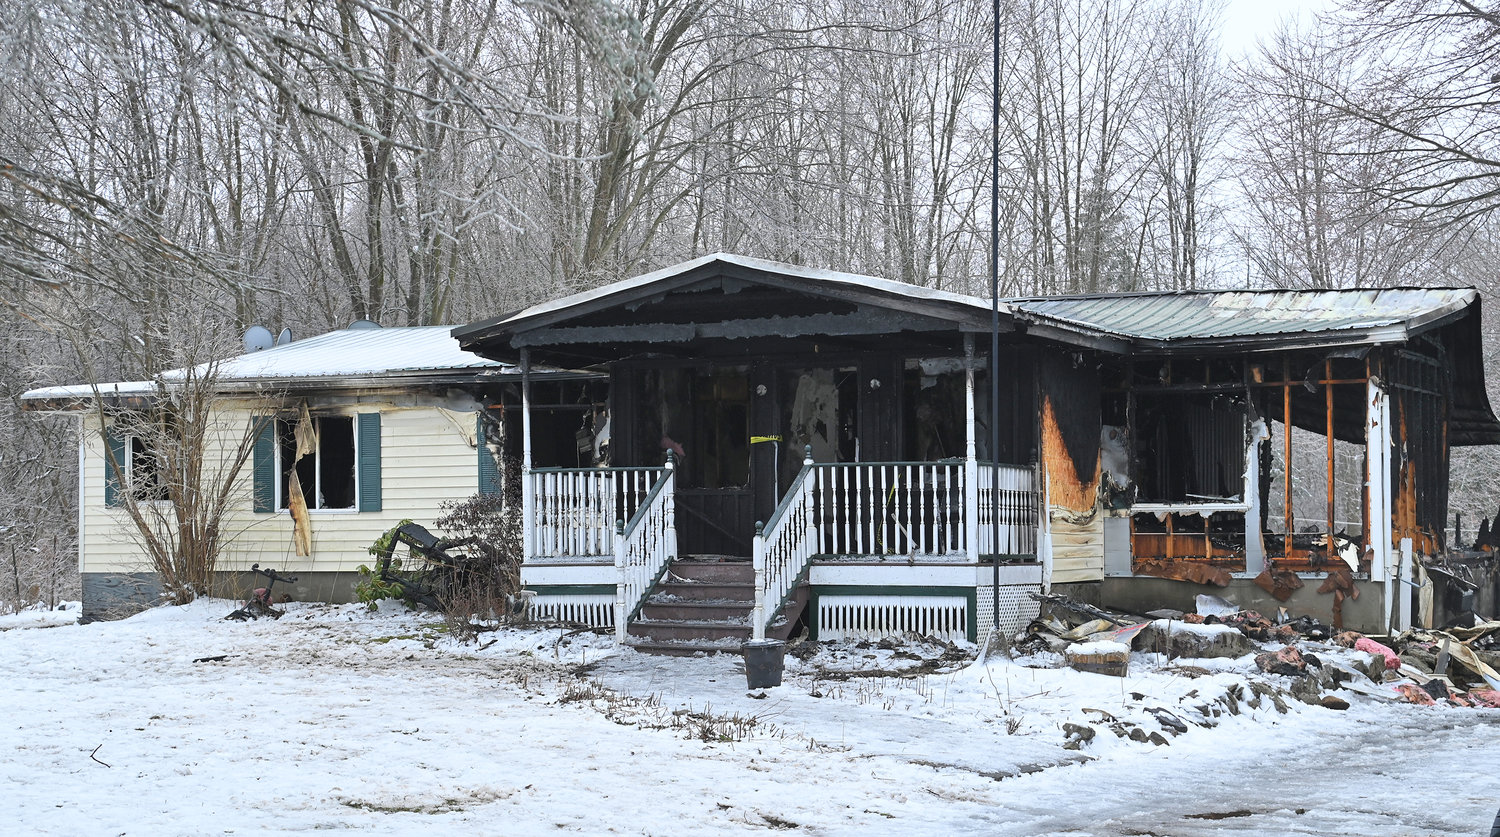 This one-story home on Jenkins Road in Westmoreland was heavily damaged by a fire early Thursday morning. Fire officials said no one was injured and the home is a total loss.